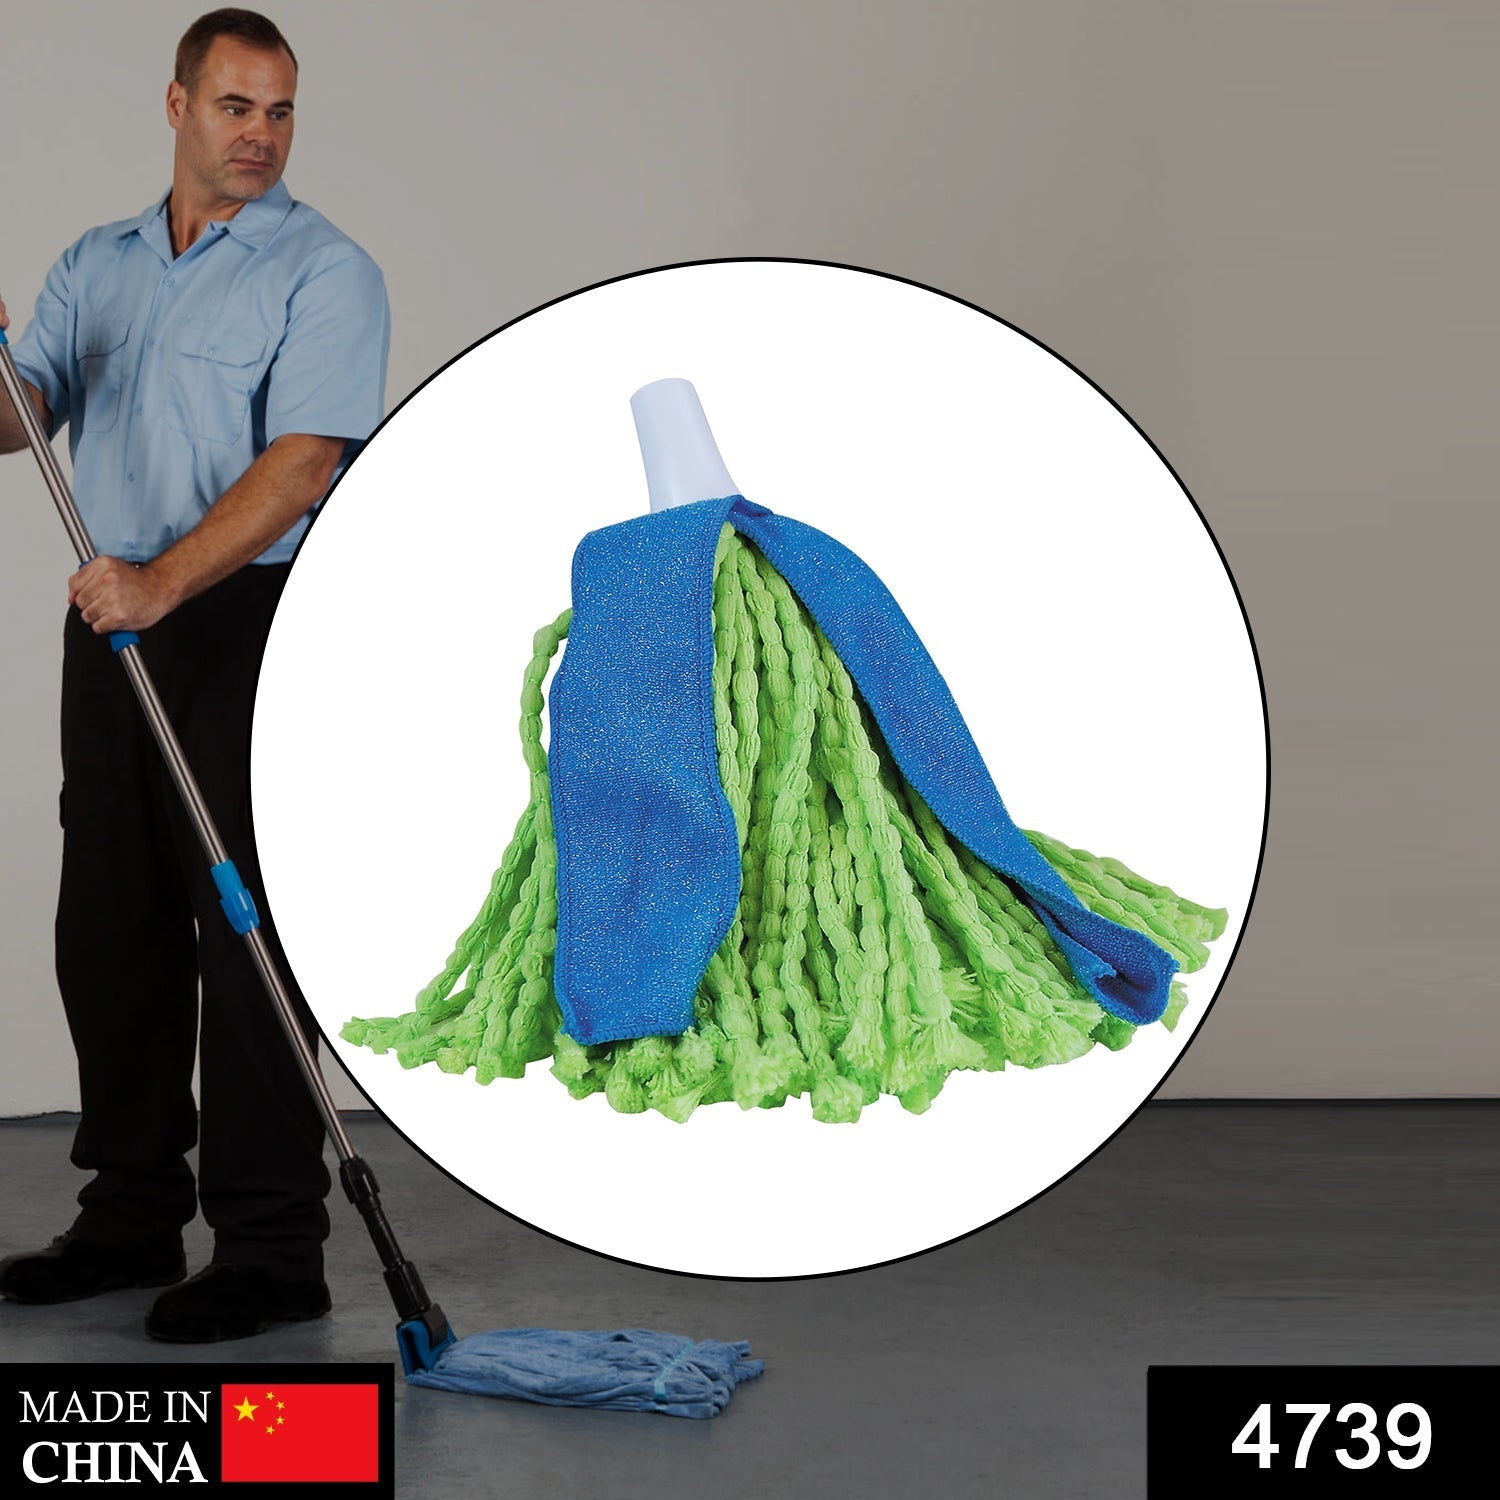 4739 Microfiber Cone Mop and Cone Broom Used for Cleaning Dusty and Wet Floor Surfaces and Tiles. DeoDap